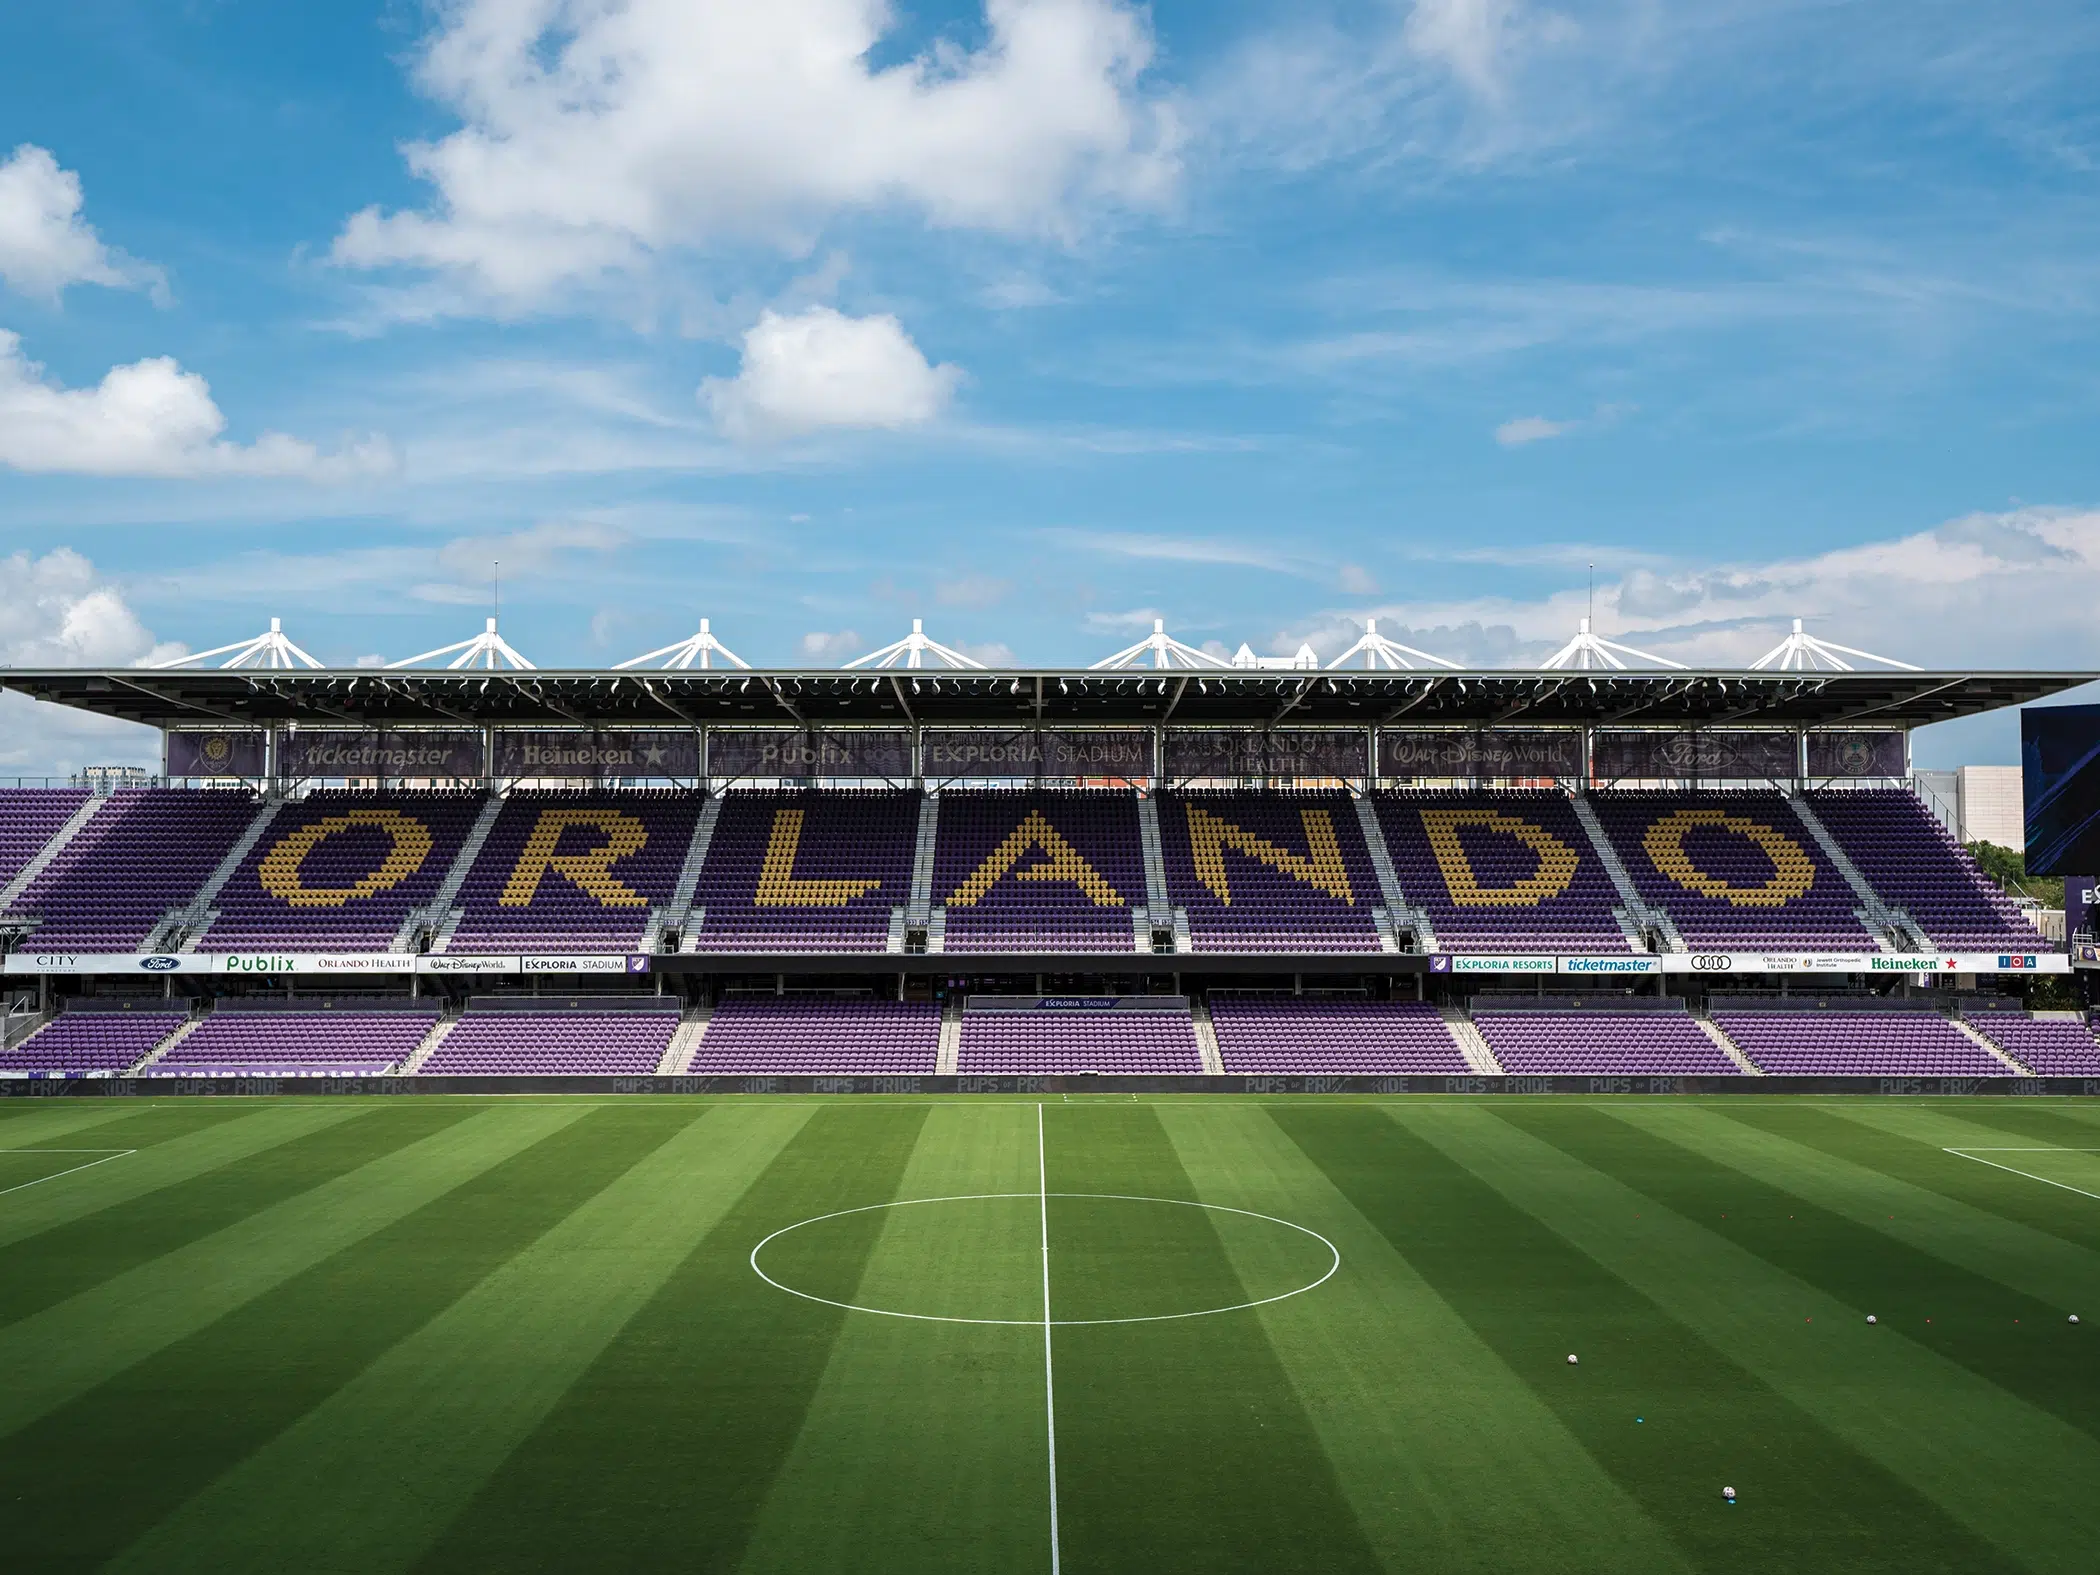 A photo taken from midfield at Exploria Stadium in Orlando, Florida. The seating is purple with the word ORLANDO spelt out in yellow.